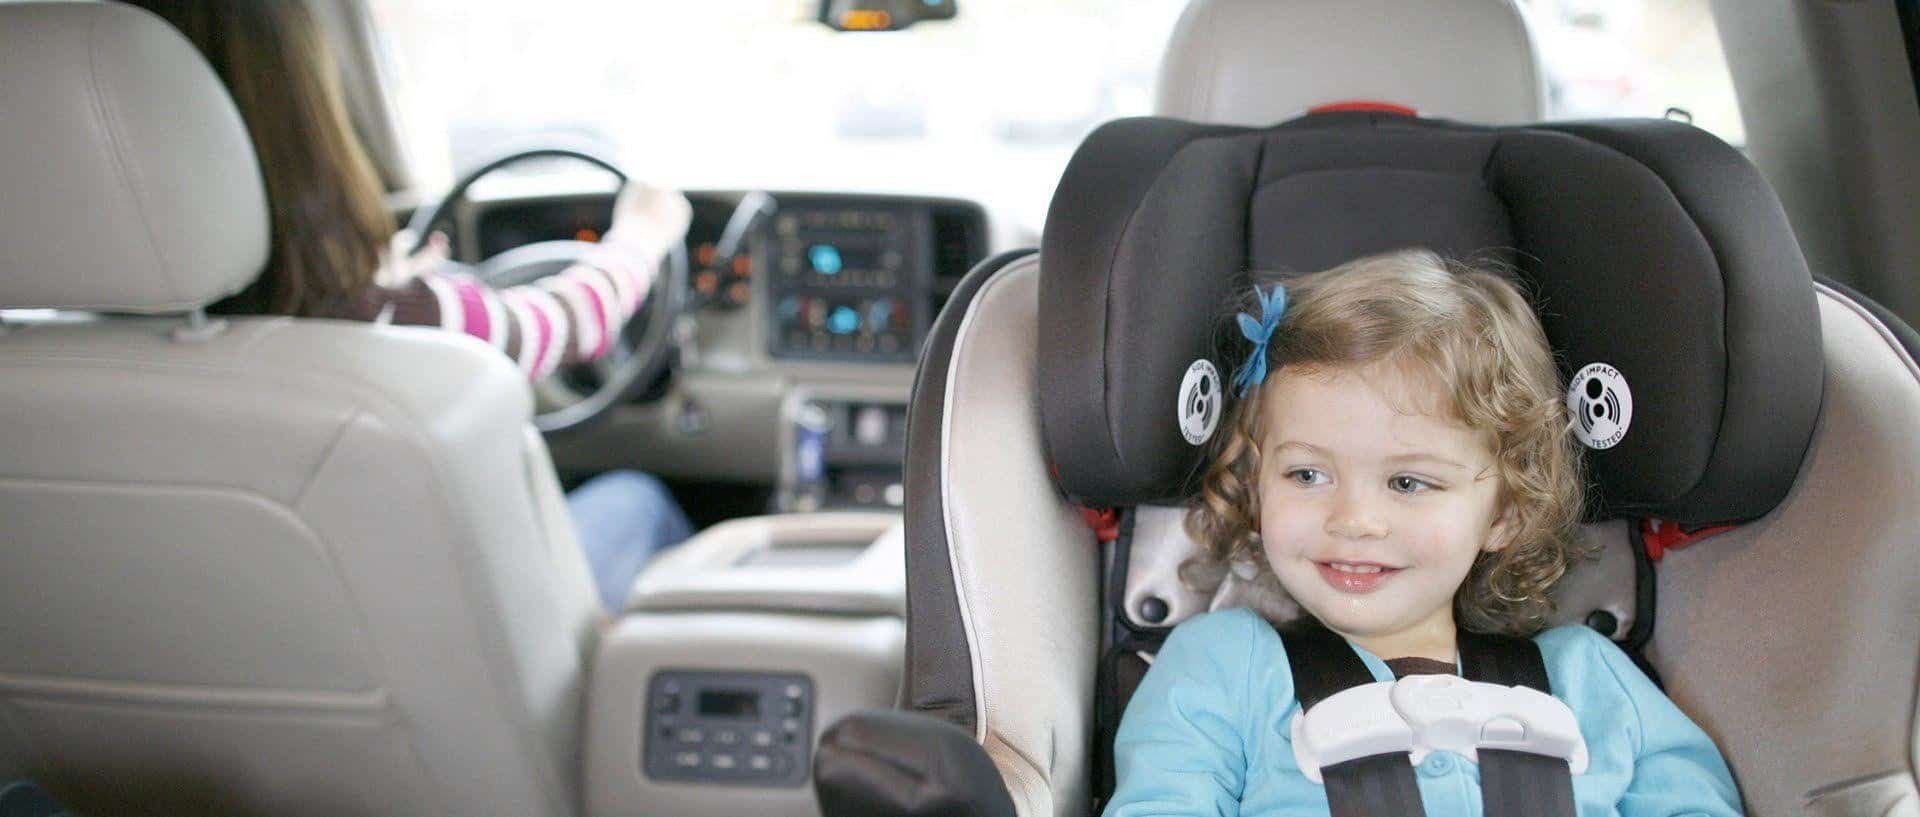 https://distasiofirm.com/wp-content/uploads/2021/02/little-girl-riding-in-a-rear-facing-car-seat-1.jpg